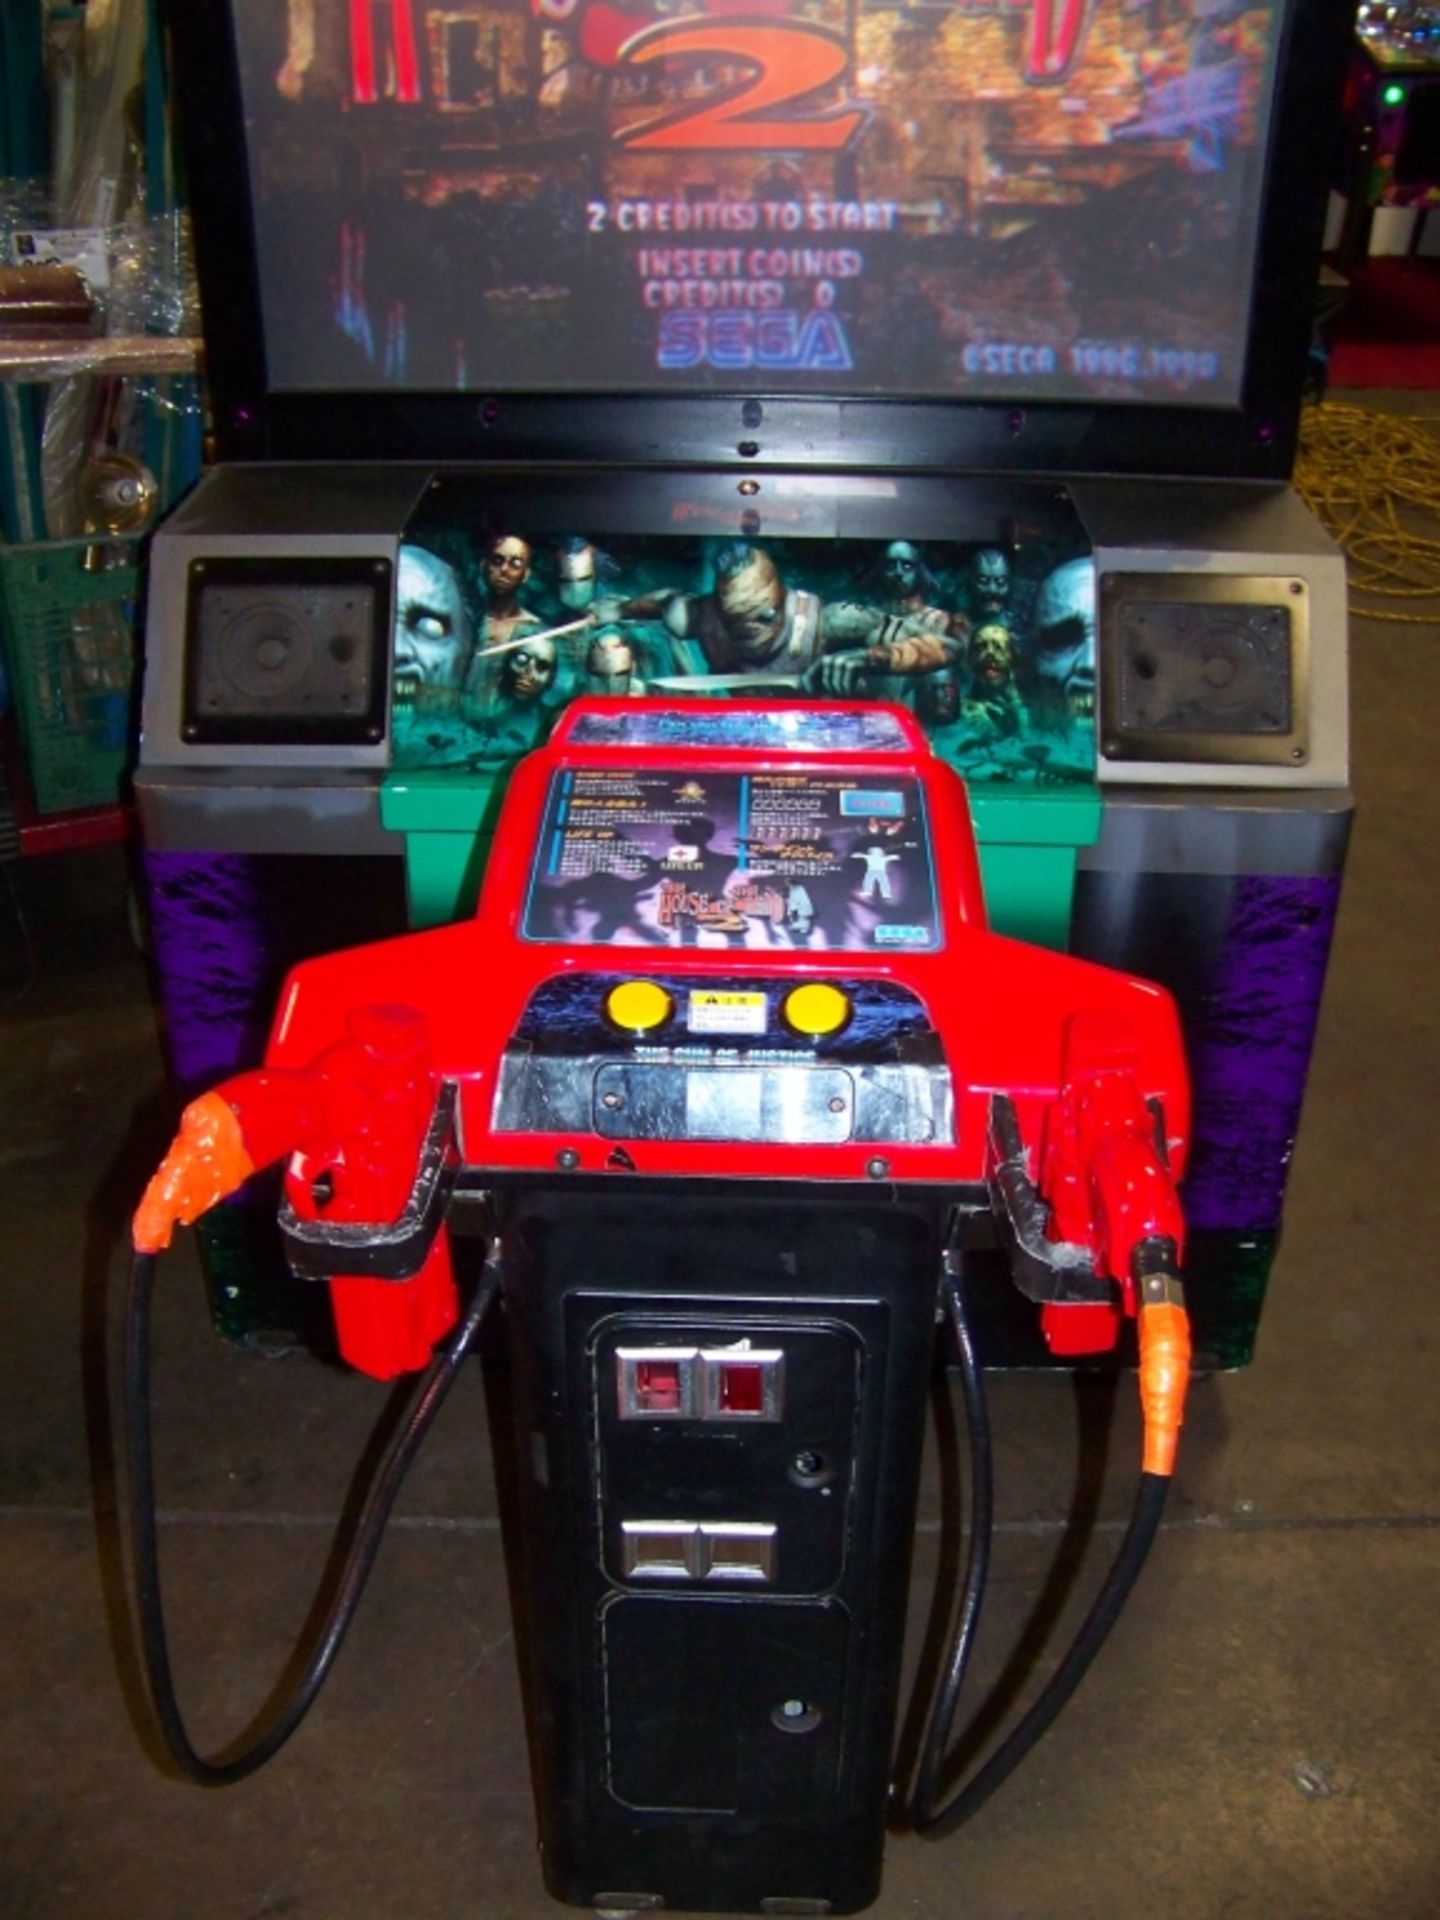 HOUSE OF THE DEAD 2 ZOMBIE DX 50"" SHOOTER ARCADE - Image 6 of 7